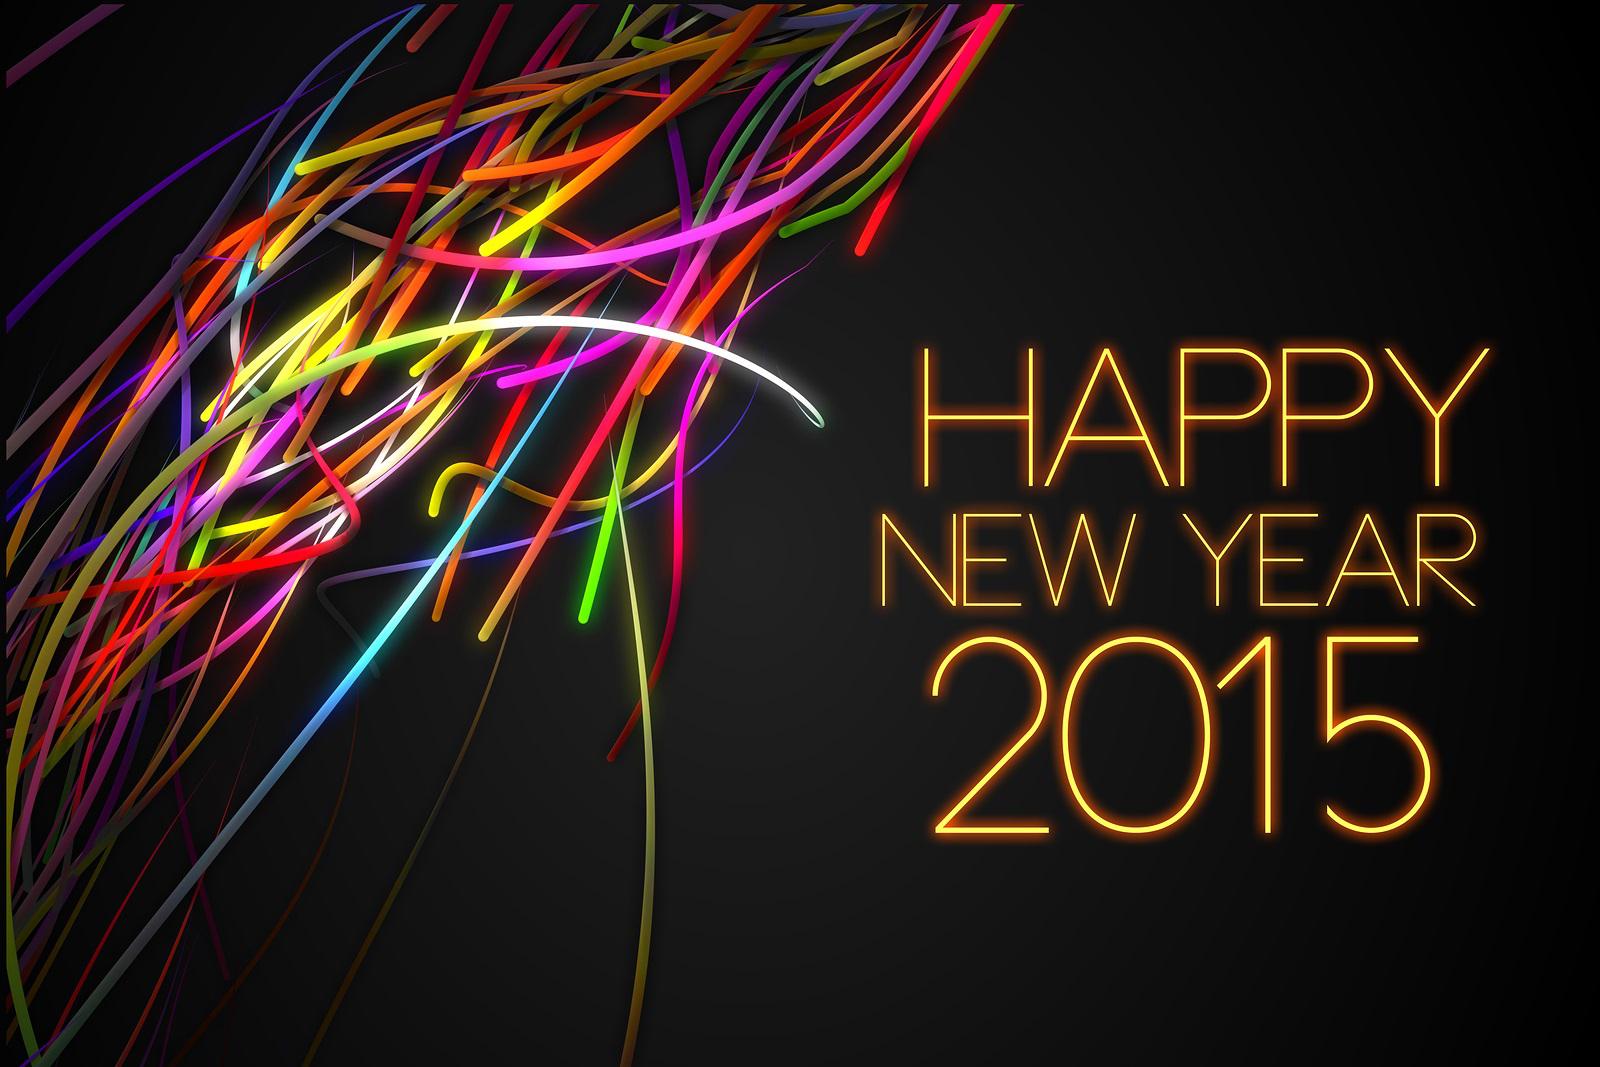 Happy New Year Abstract Image Wallpaper